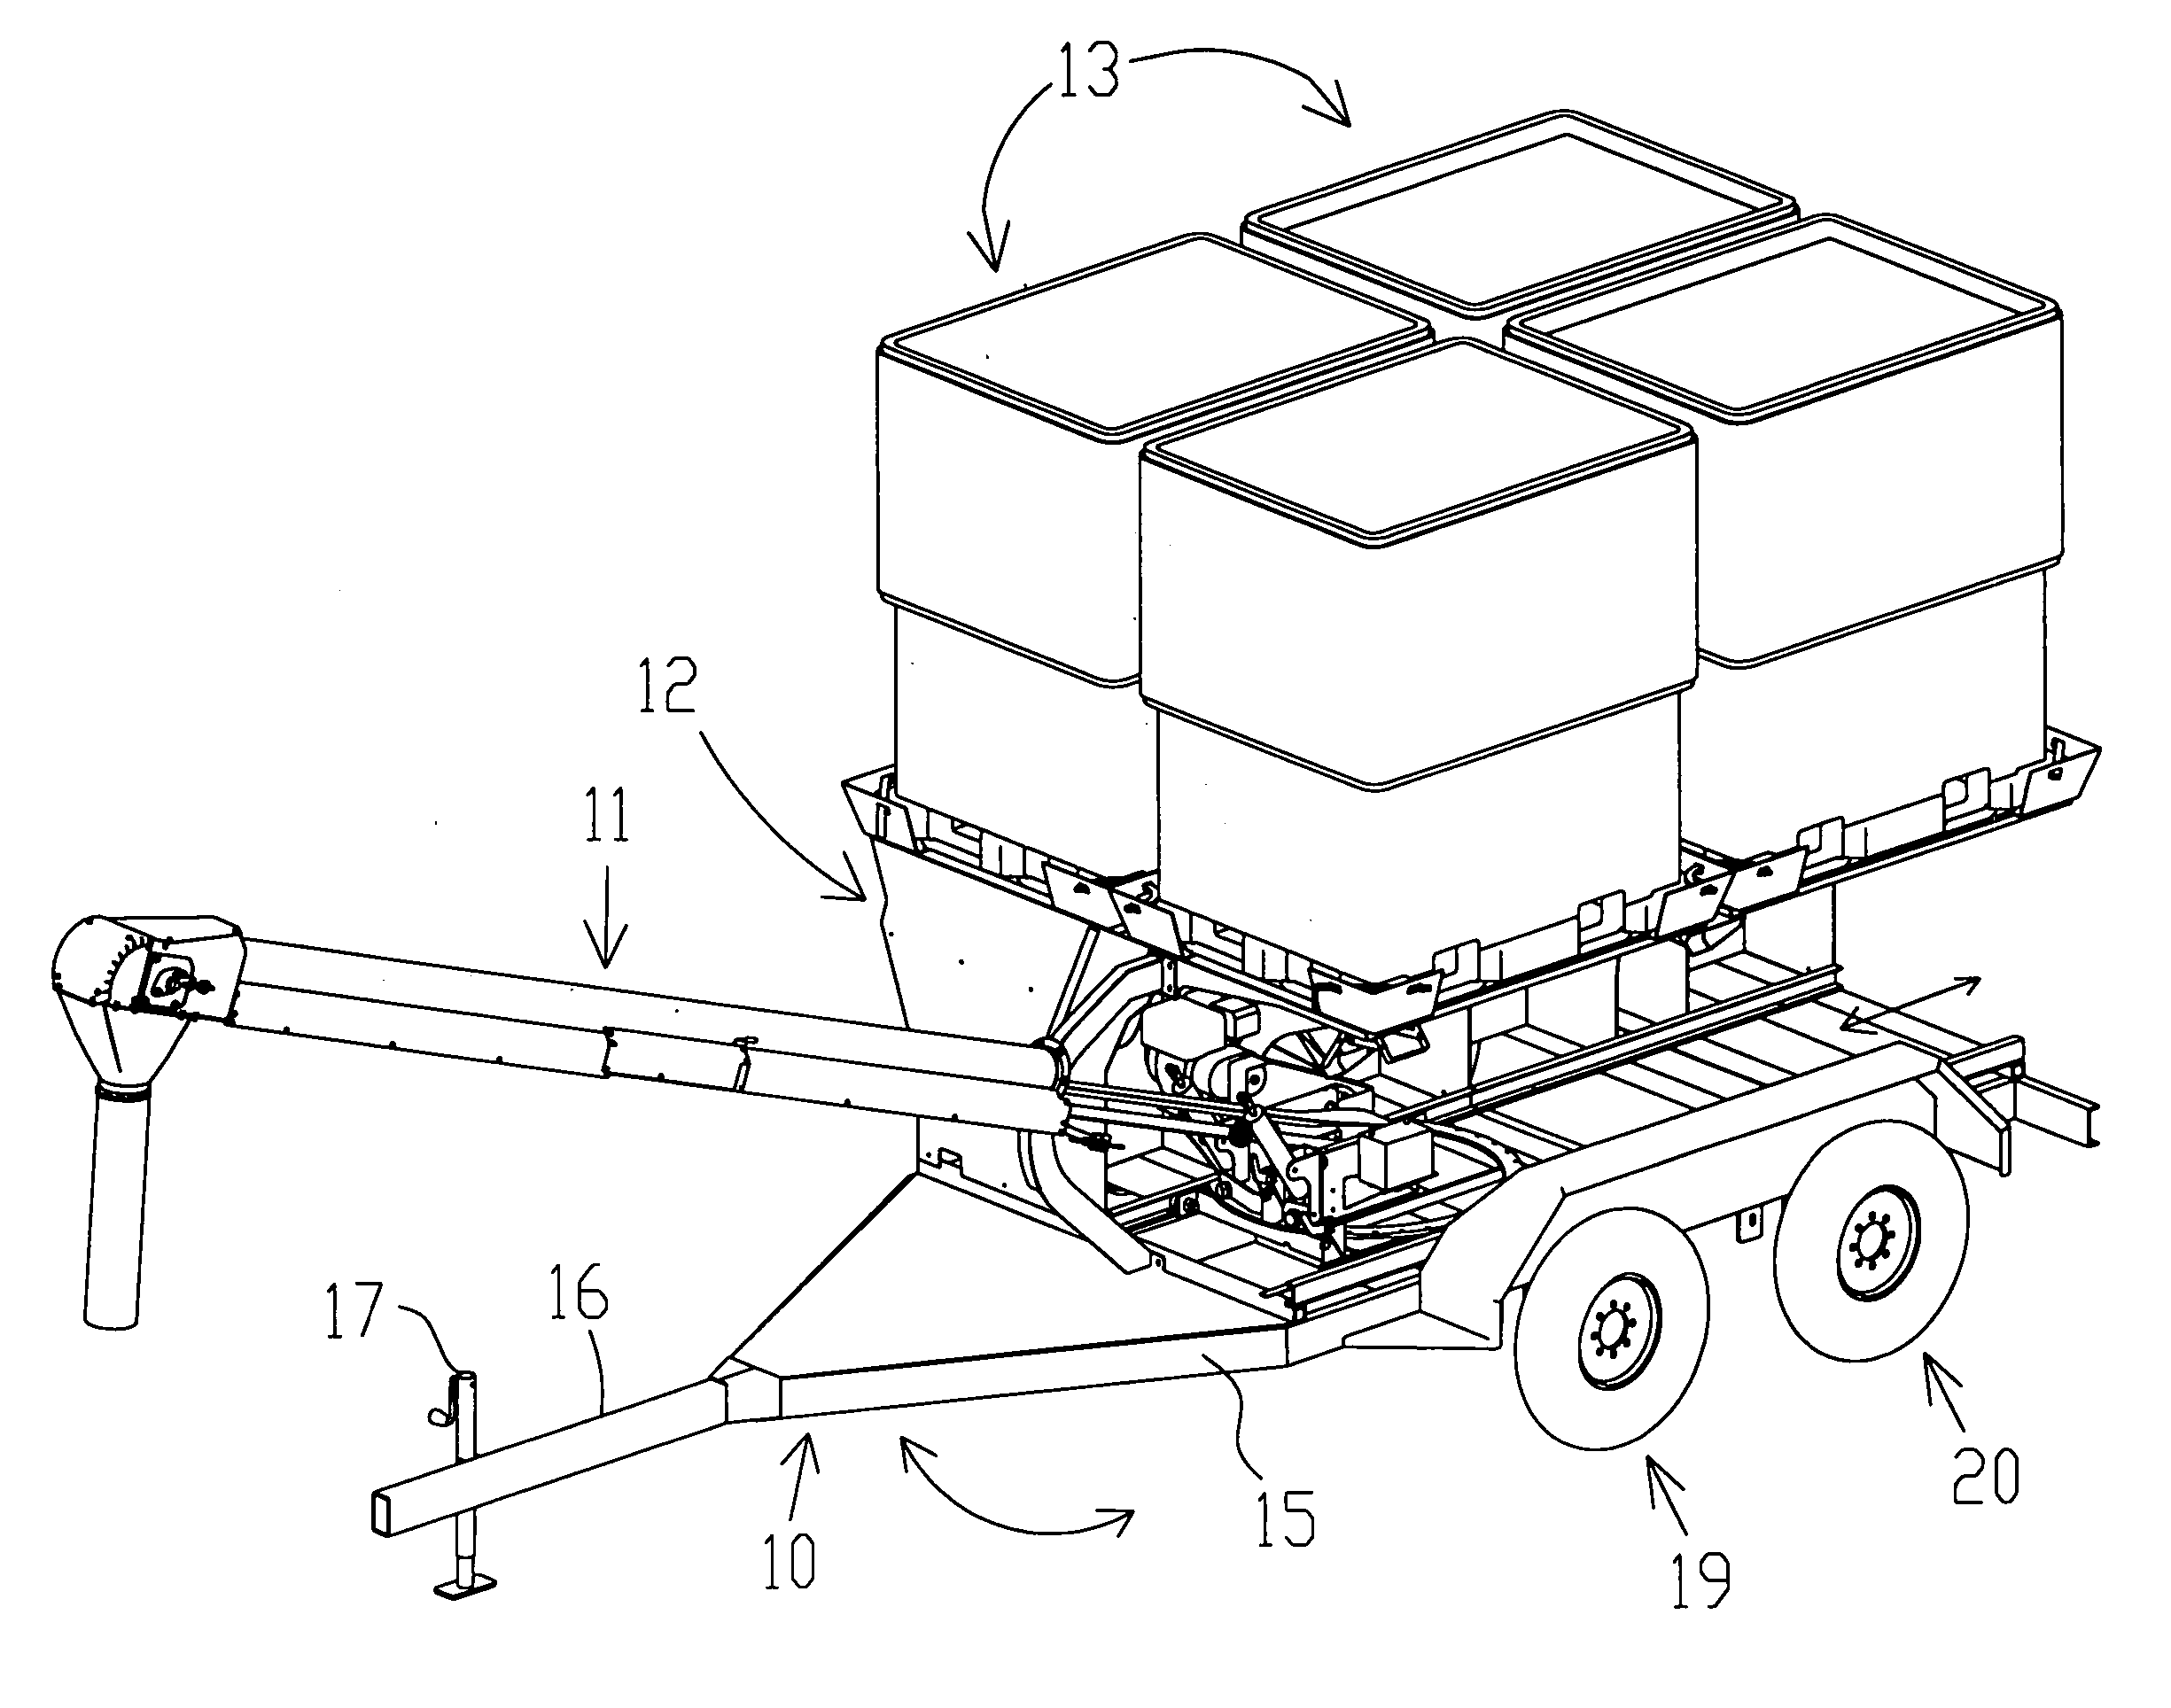 Agricultural seed tender with modular storage containers